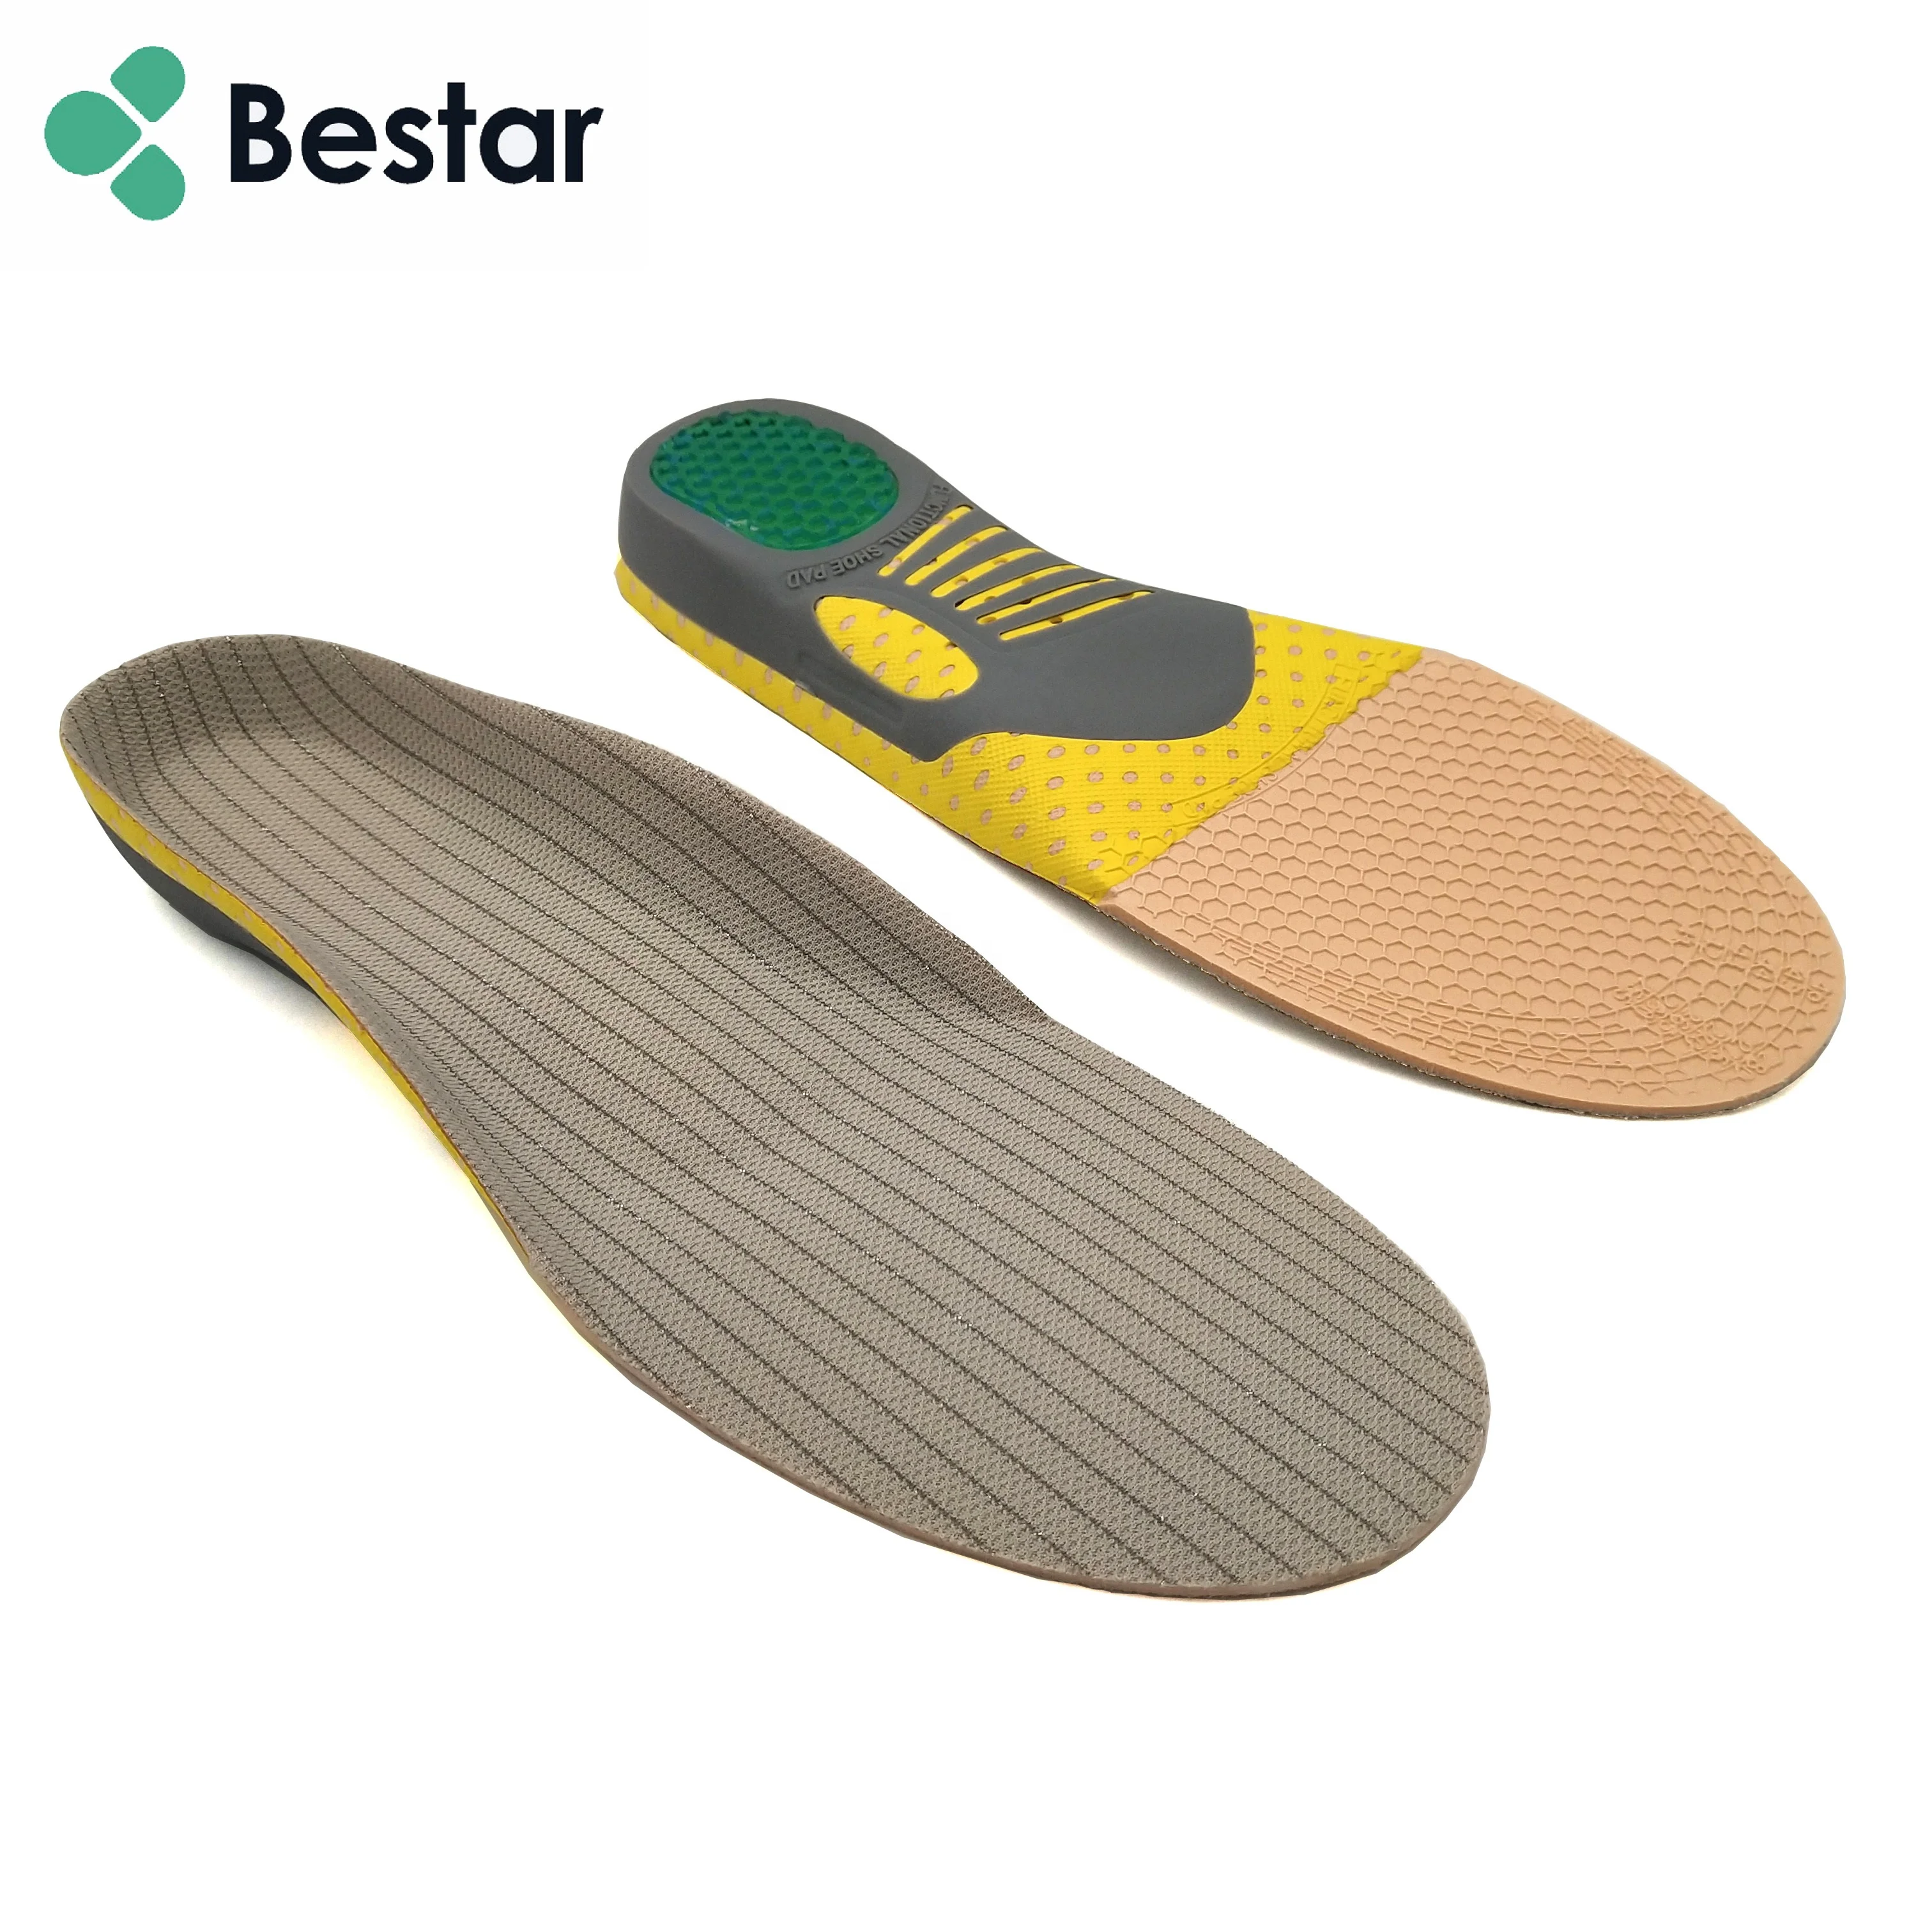 

Cushion Insert arch support Insole EVA shoe insoles for Shoes Everyday Customized Logo heel stable Feature